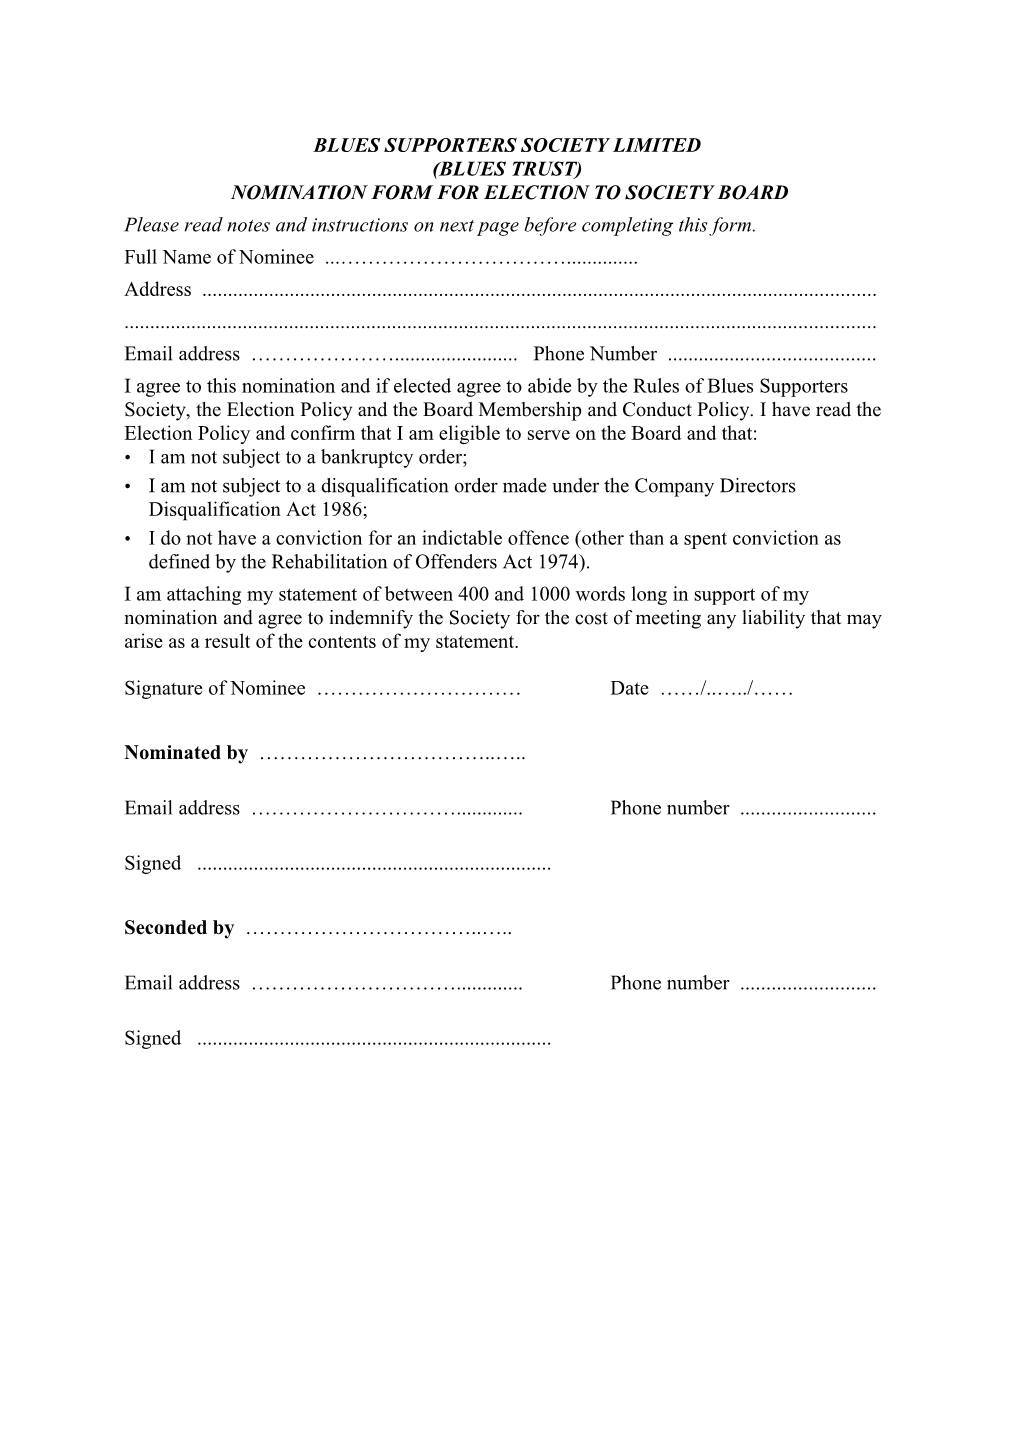 Blues Supporters Society Limited (Blues Trust) Nominationform for Election to Society Board